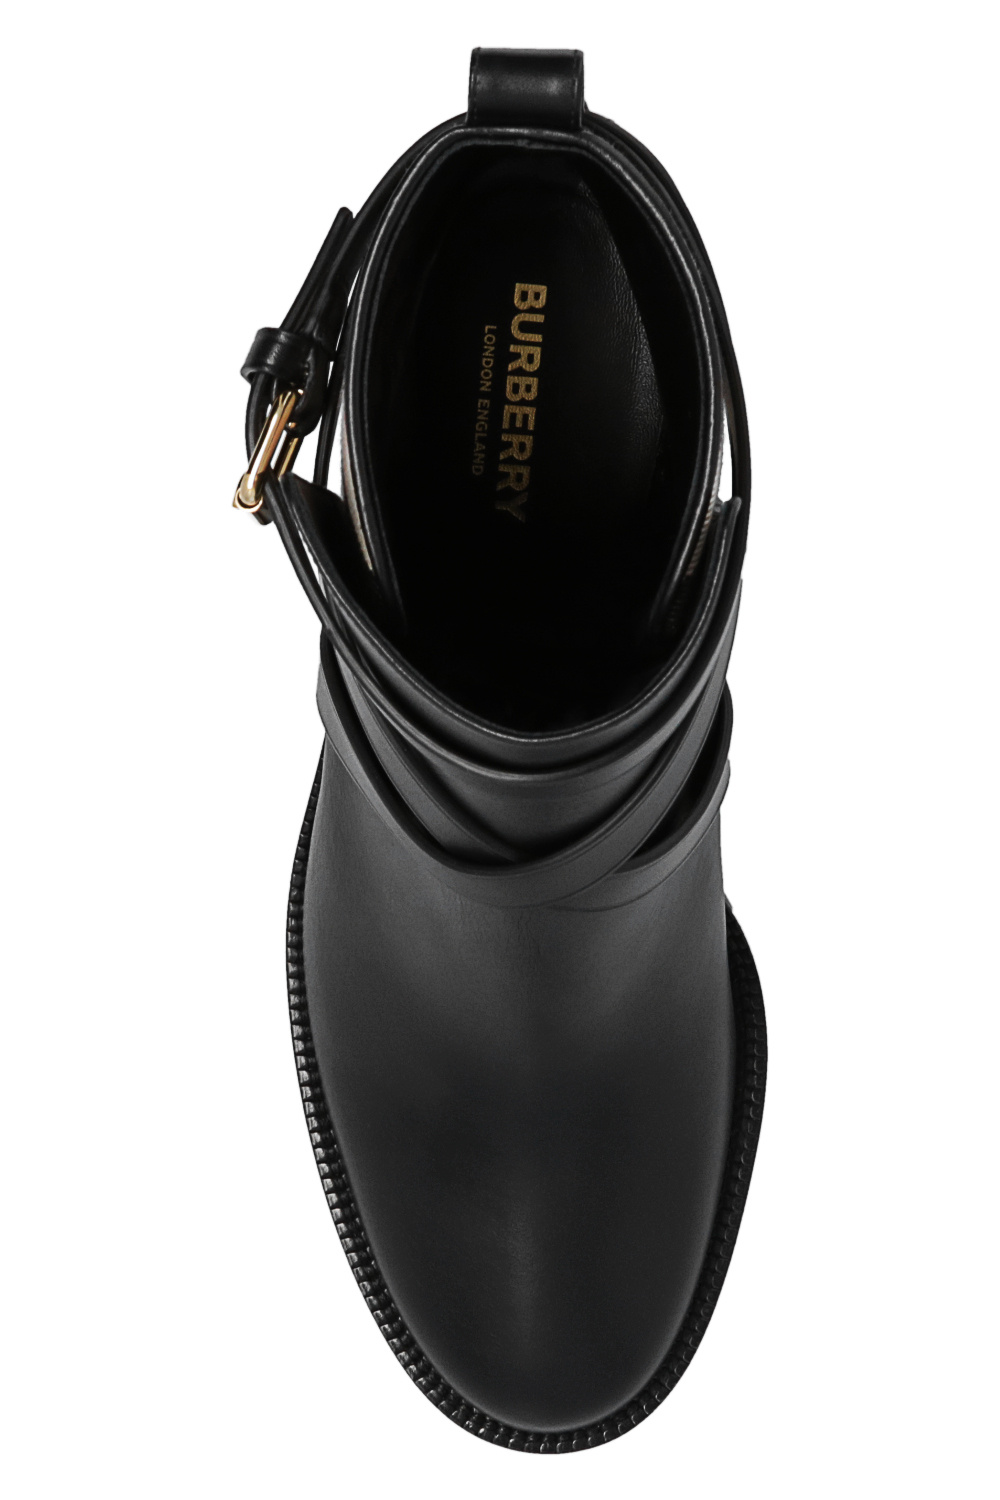 burberry black ‘New Pryle’ heeled ankle boots